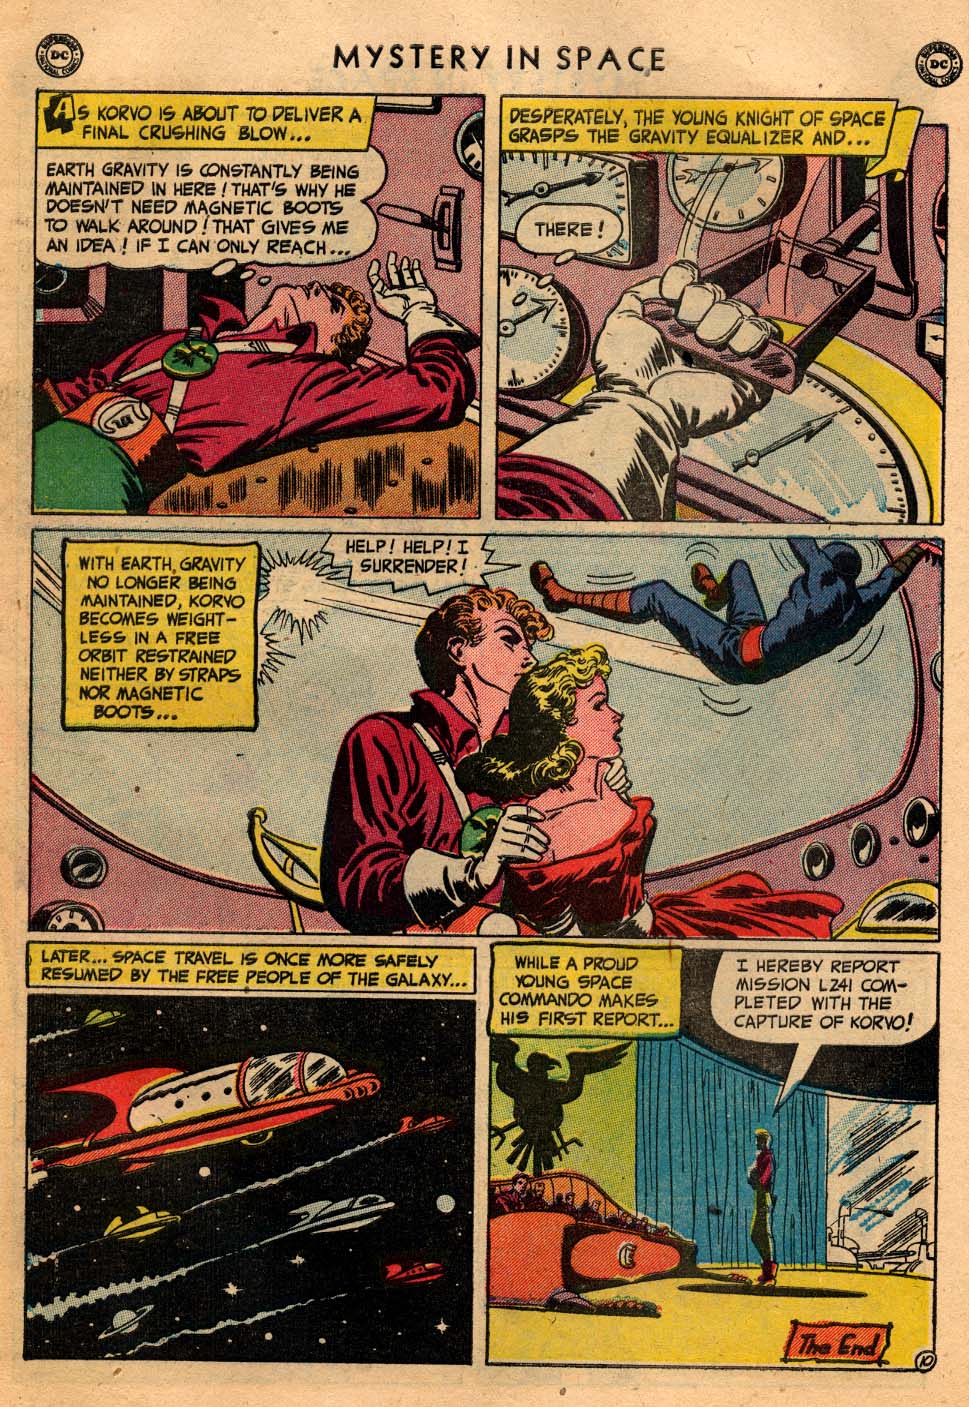 Mystery in Space (1951) 1 Page 11